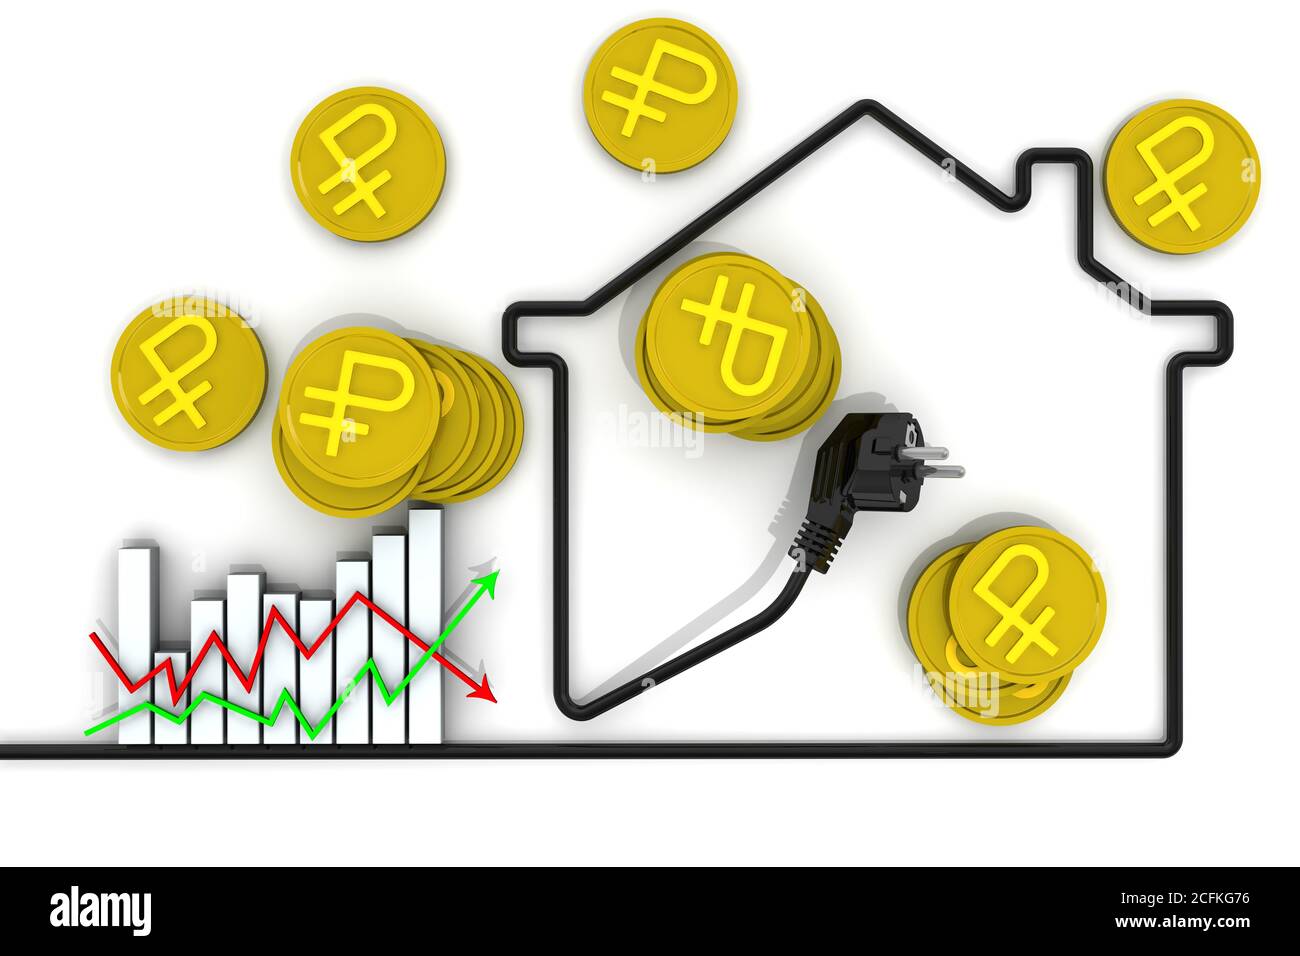 Graph changes in electricity tariffs, contour houses made of electrical wire and golden coins with the symbol of Russian ruble. 3D Illustration Stock Photo